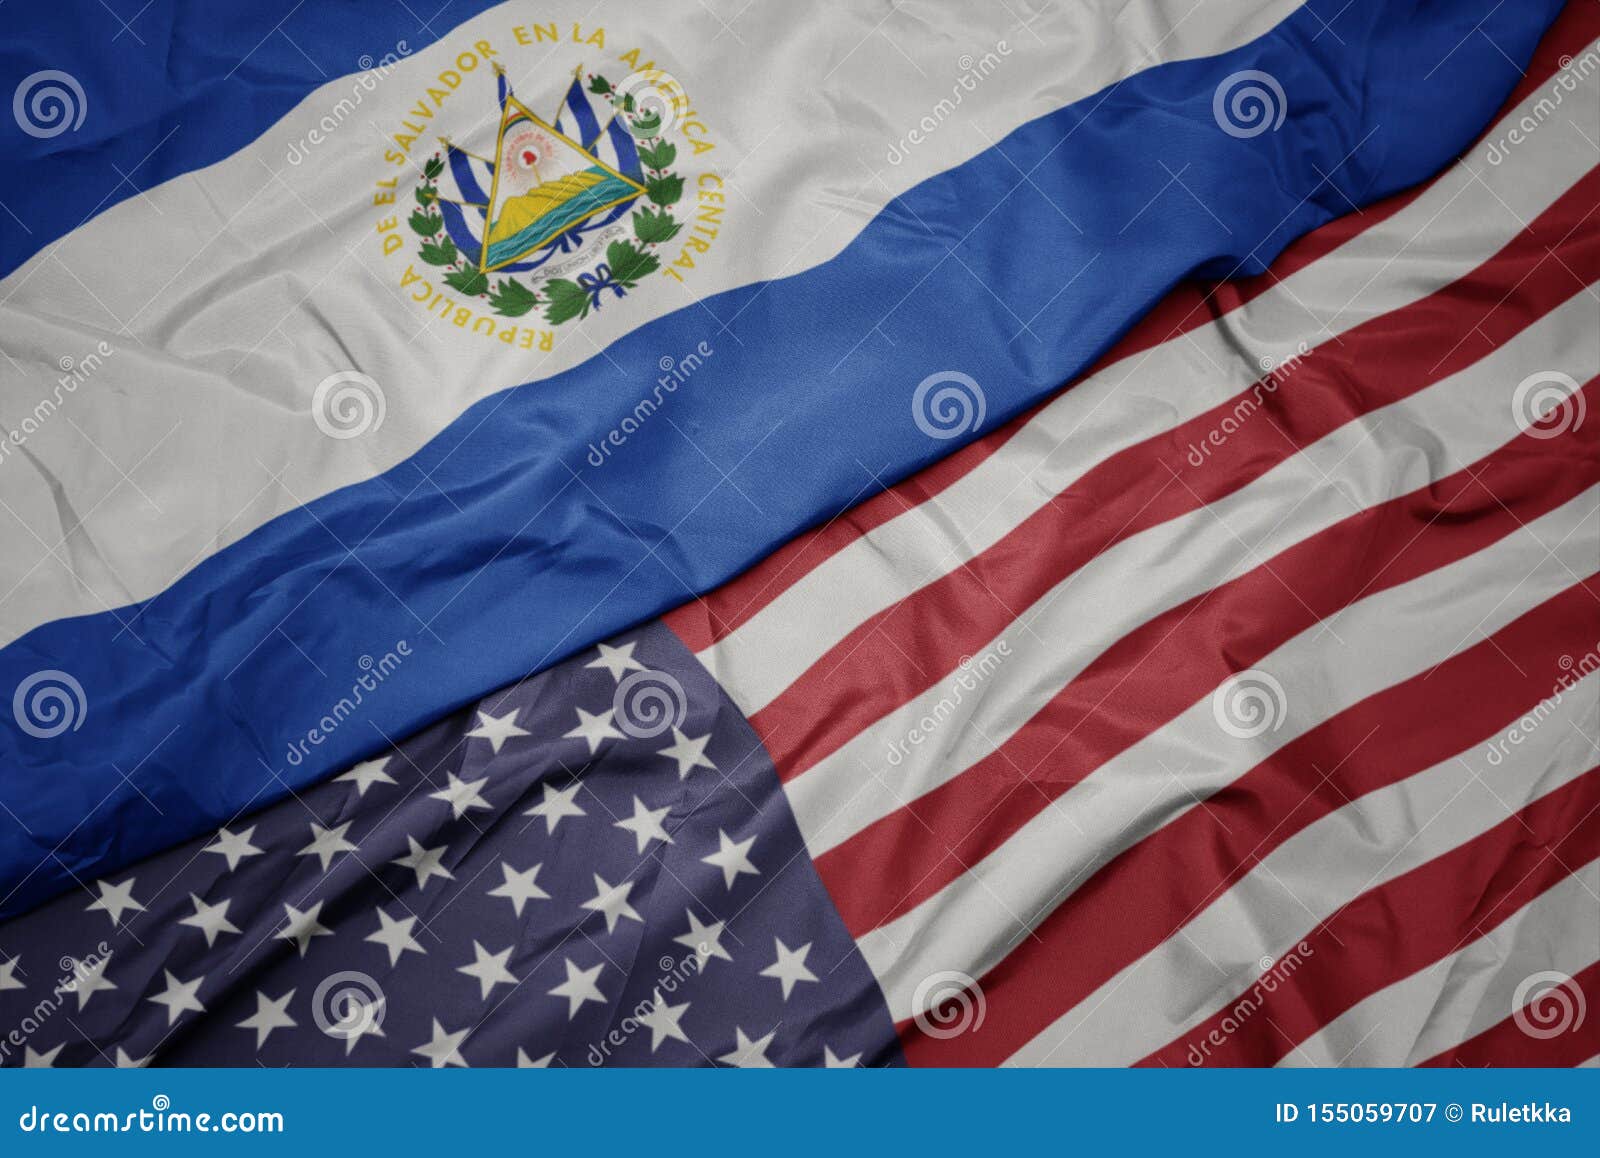 waving colorful flag of united states of america and national flag of el salvador